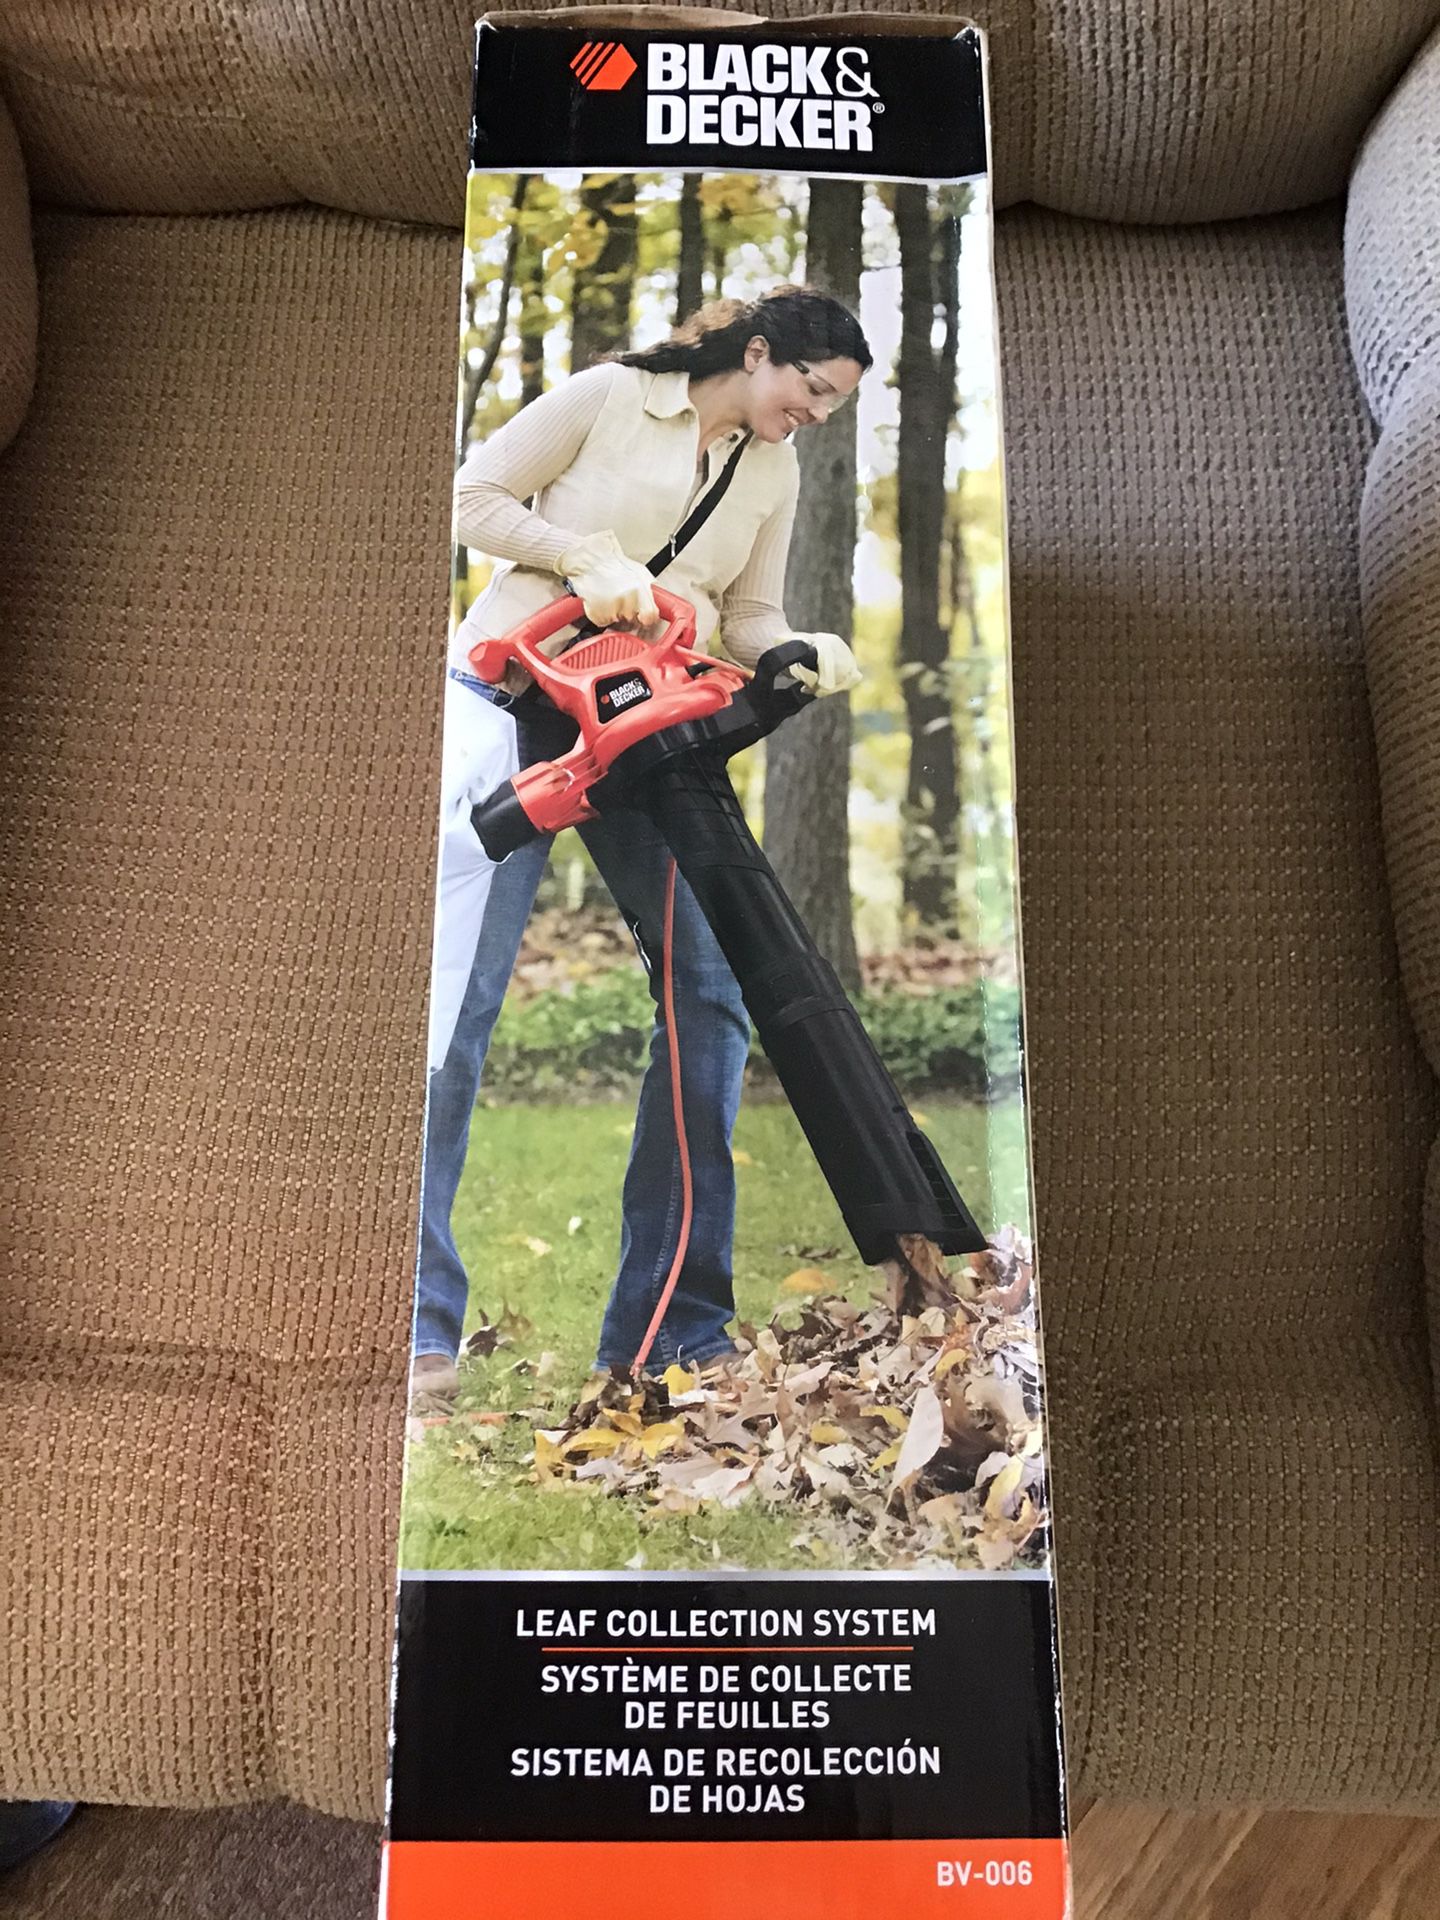 Black and decker leaf collection system new in box $15